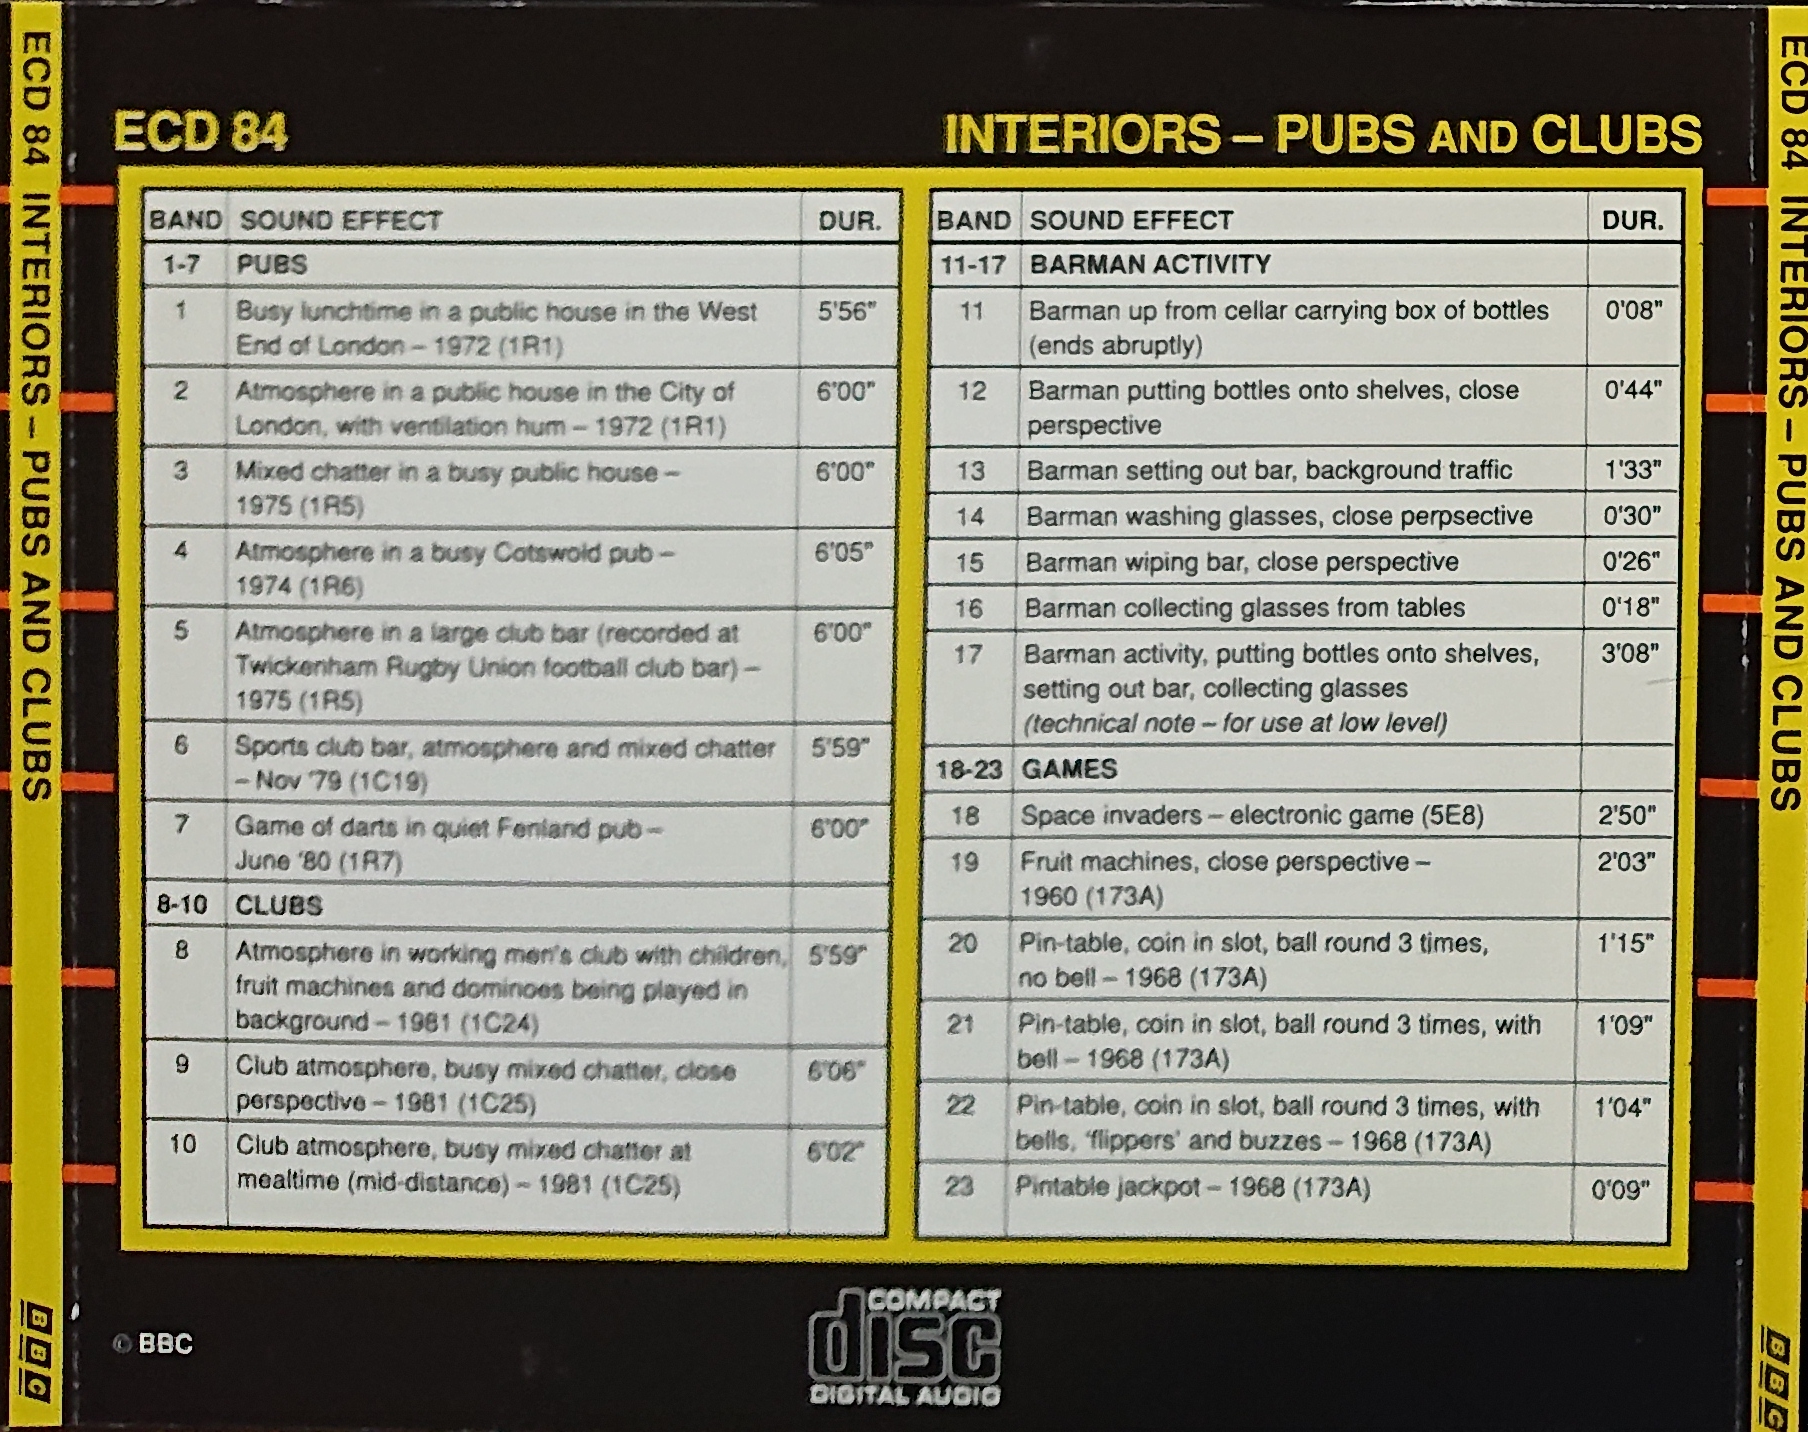 Picture of ECD 84 Interiors - Pubs and clubs by artist Various from the BBC records and Tapes library